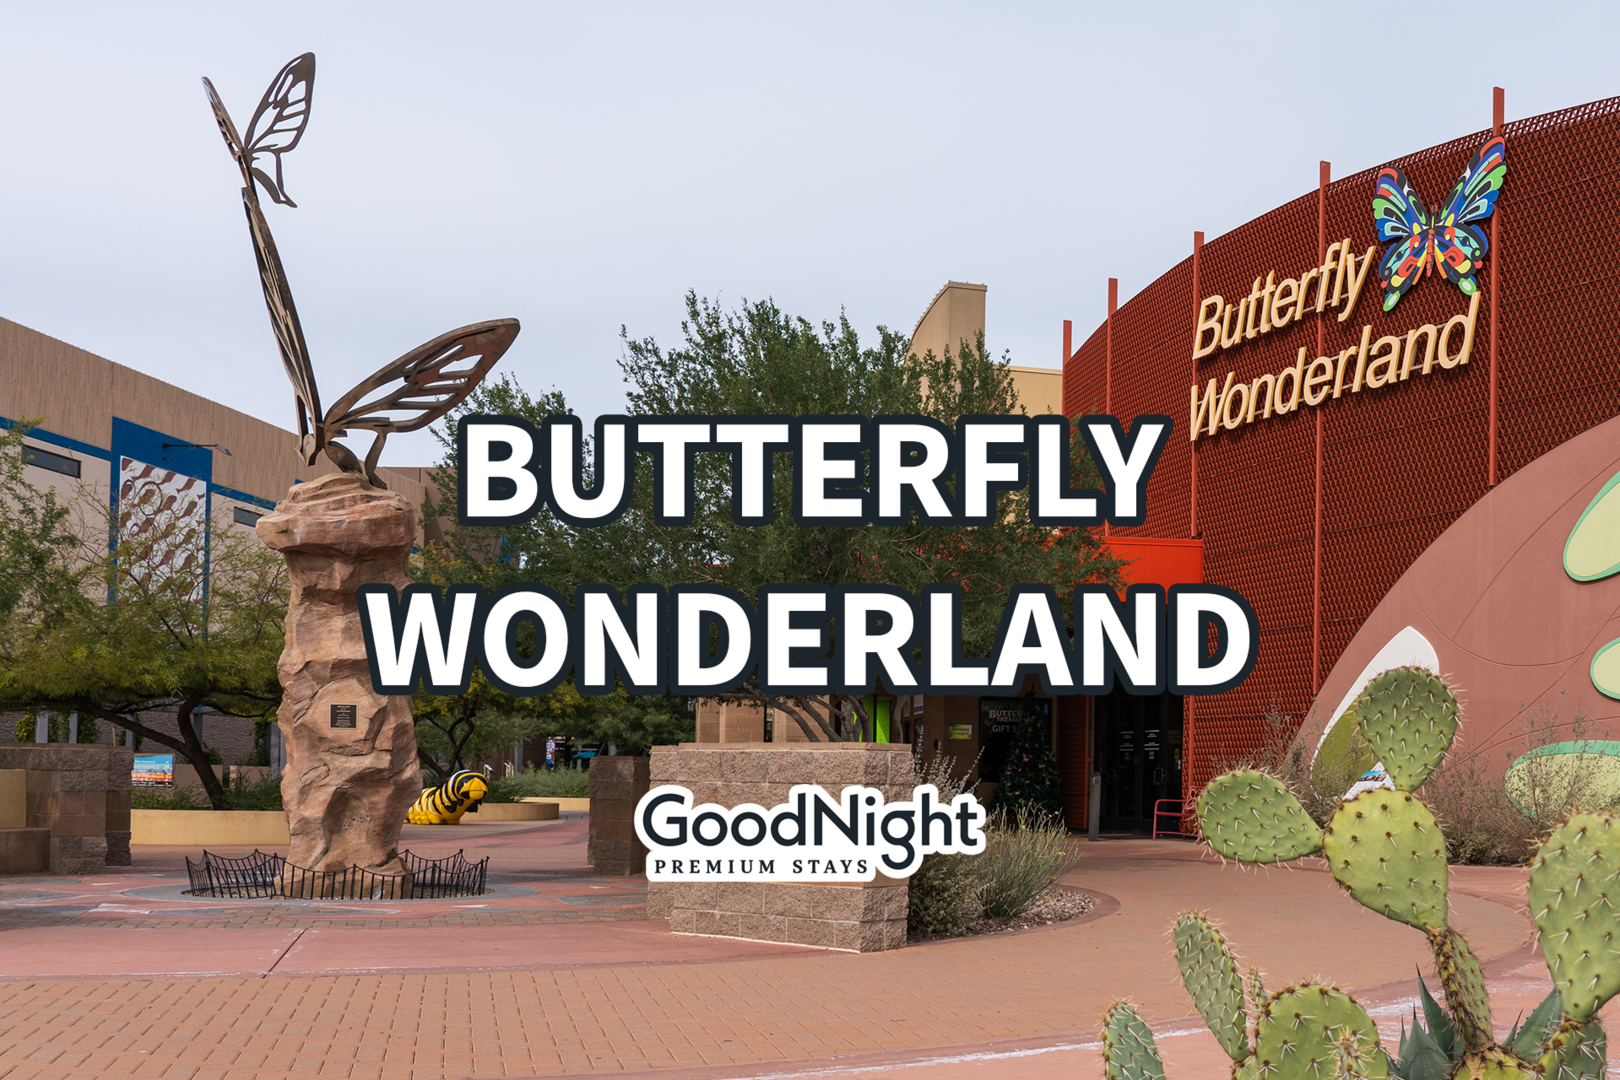 15 mins: Butterfly Wonderland - Largest Butterfly Conservatory in America